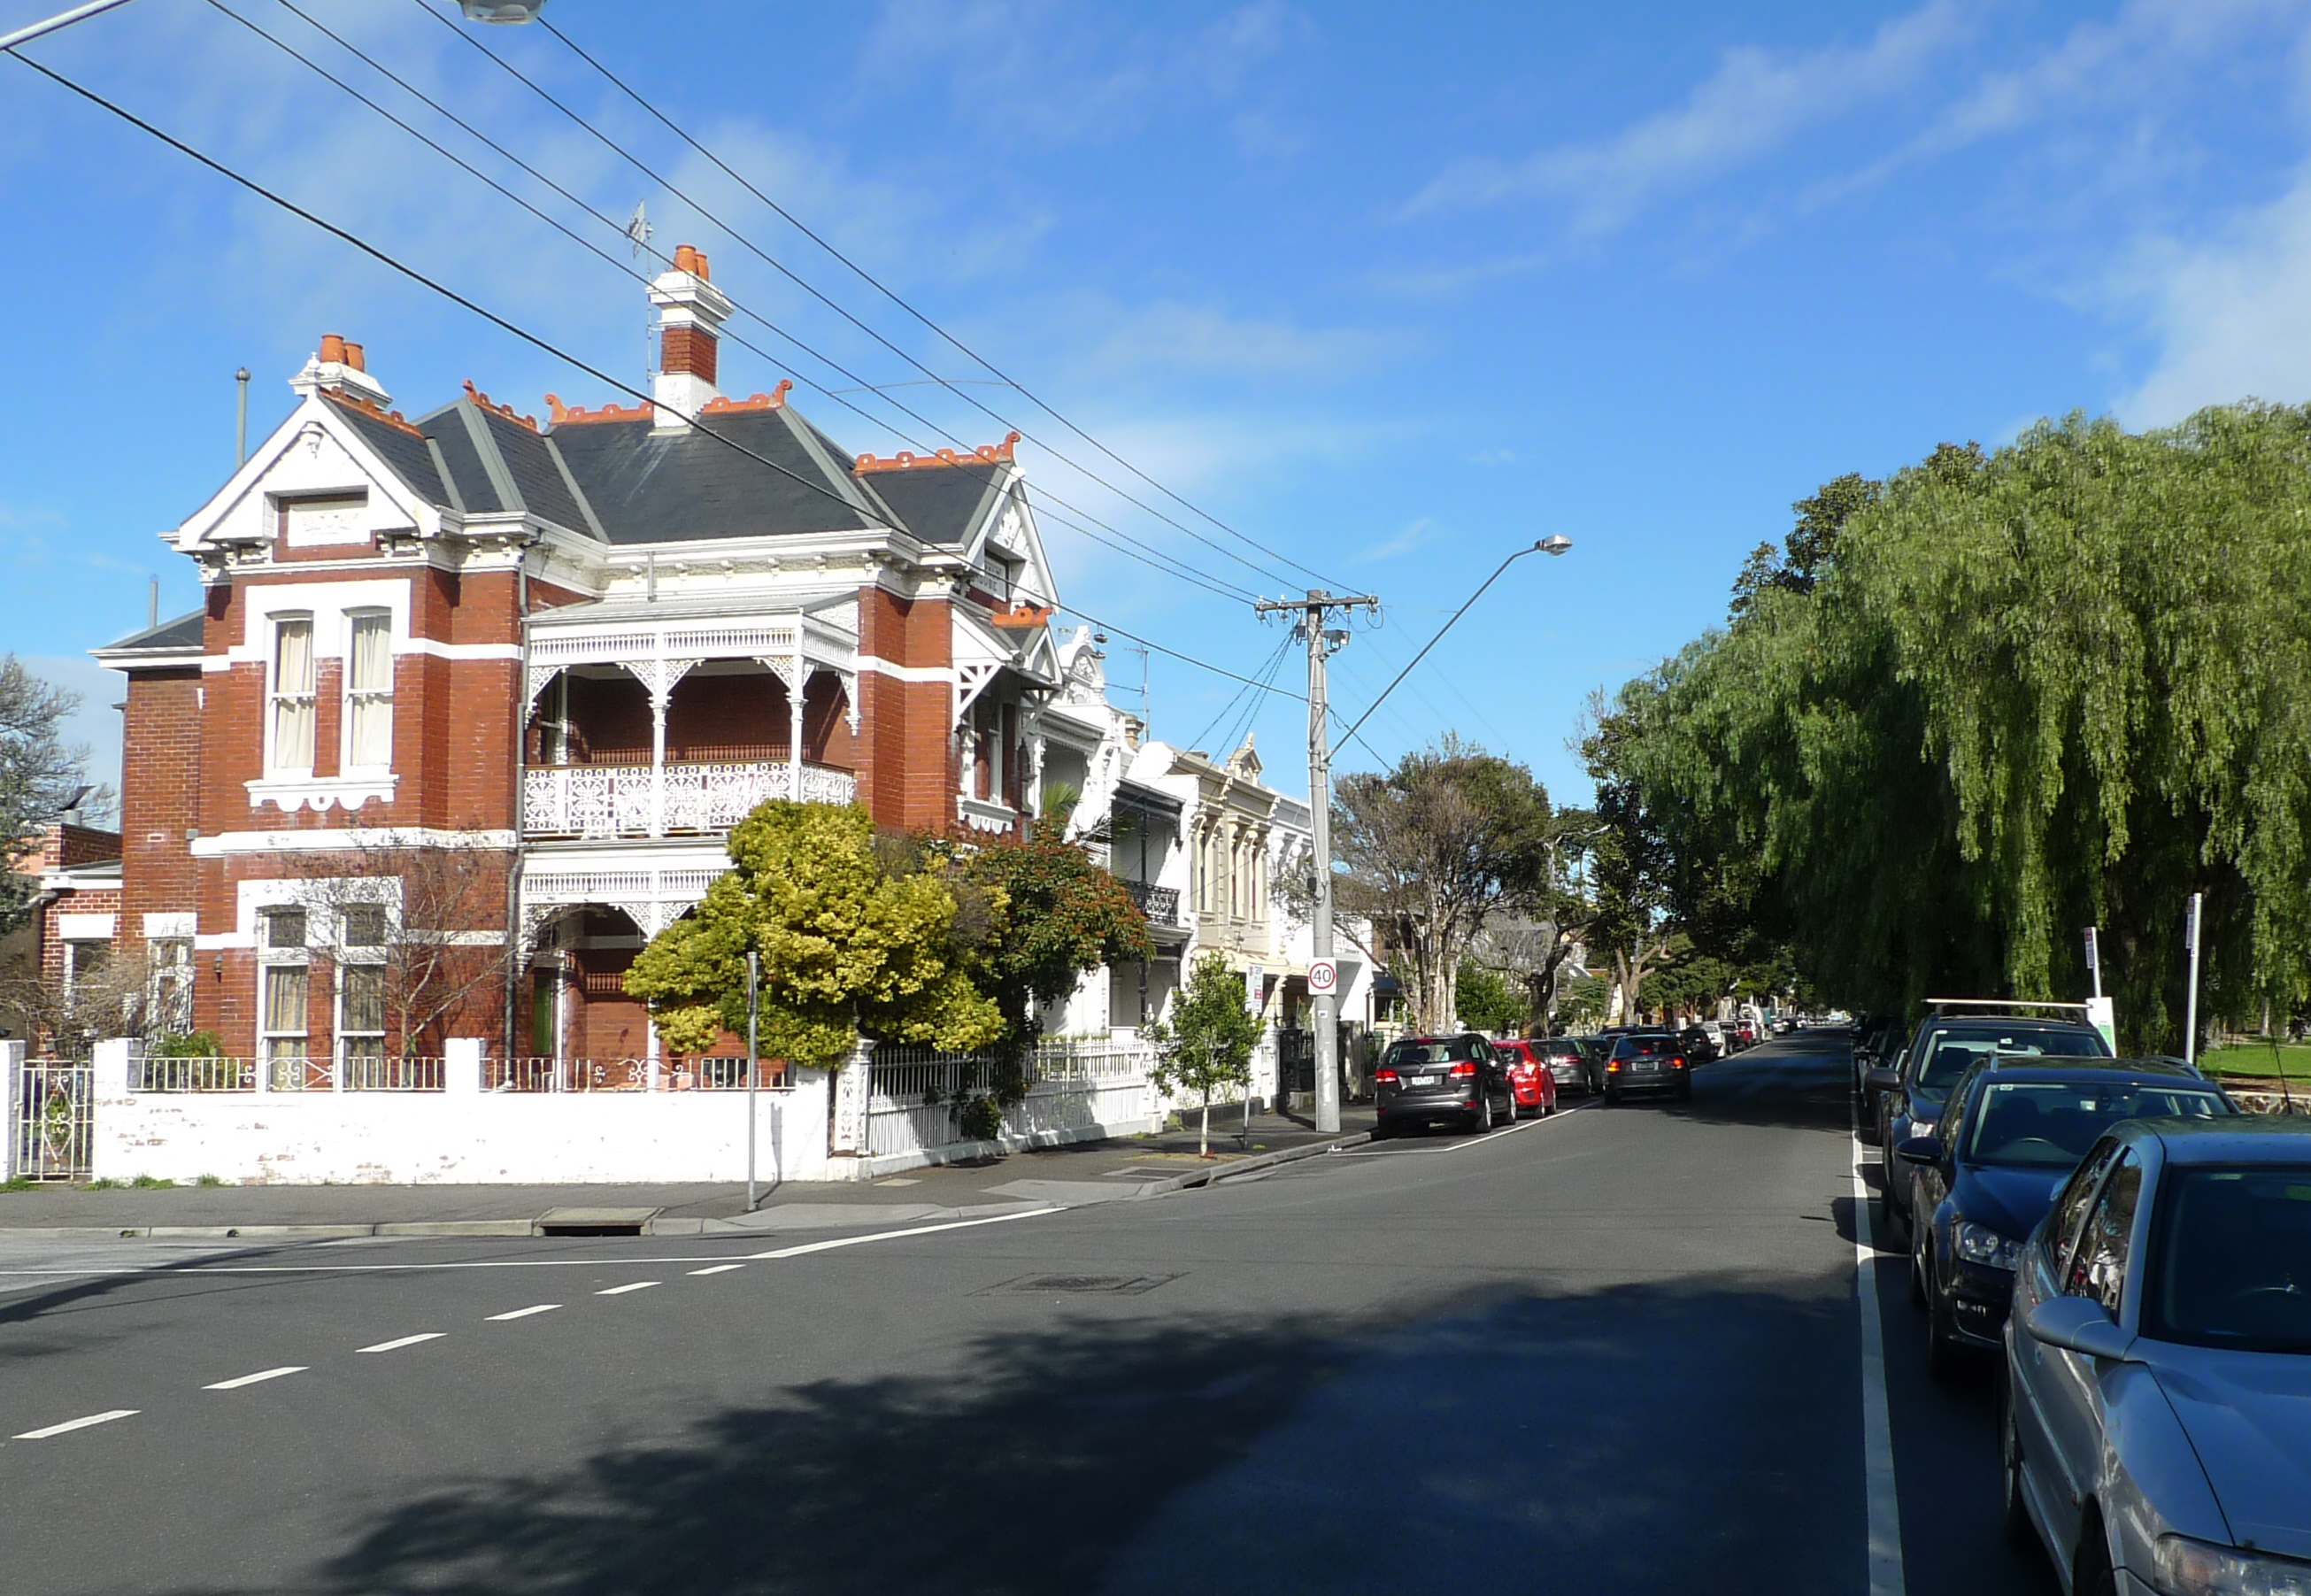 Station Street,  2016 and Station Street, 1907